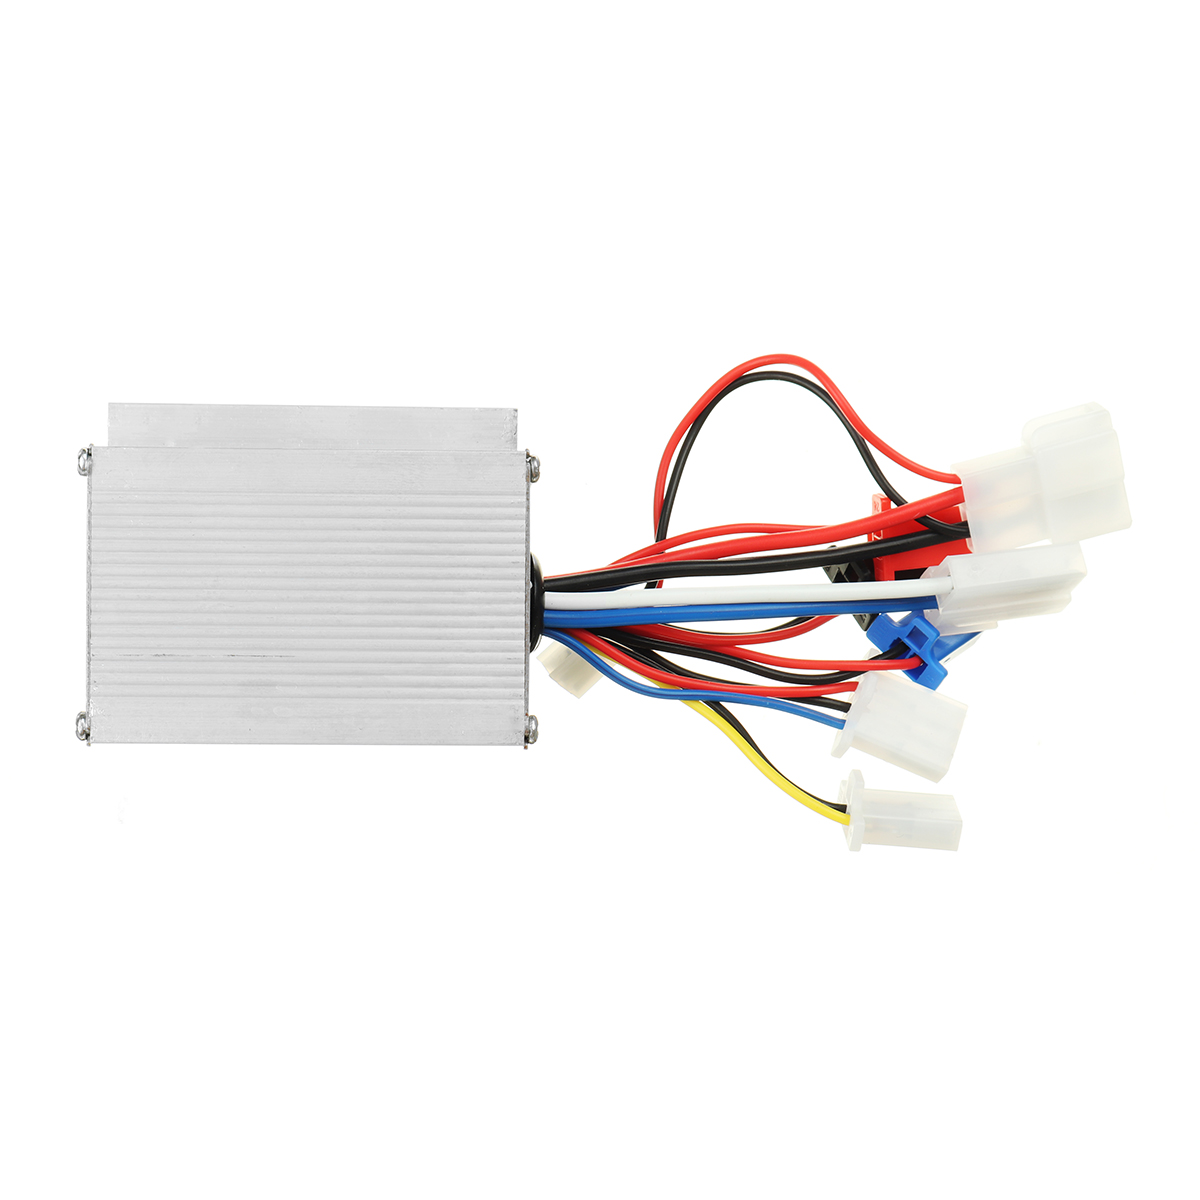 Find 24V/36V/48V 250/350/500W Brushed Controller Box for Electric Bicycle Scooter for Sale on Gipsybee.com with cryptocurrencies